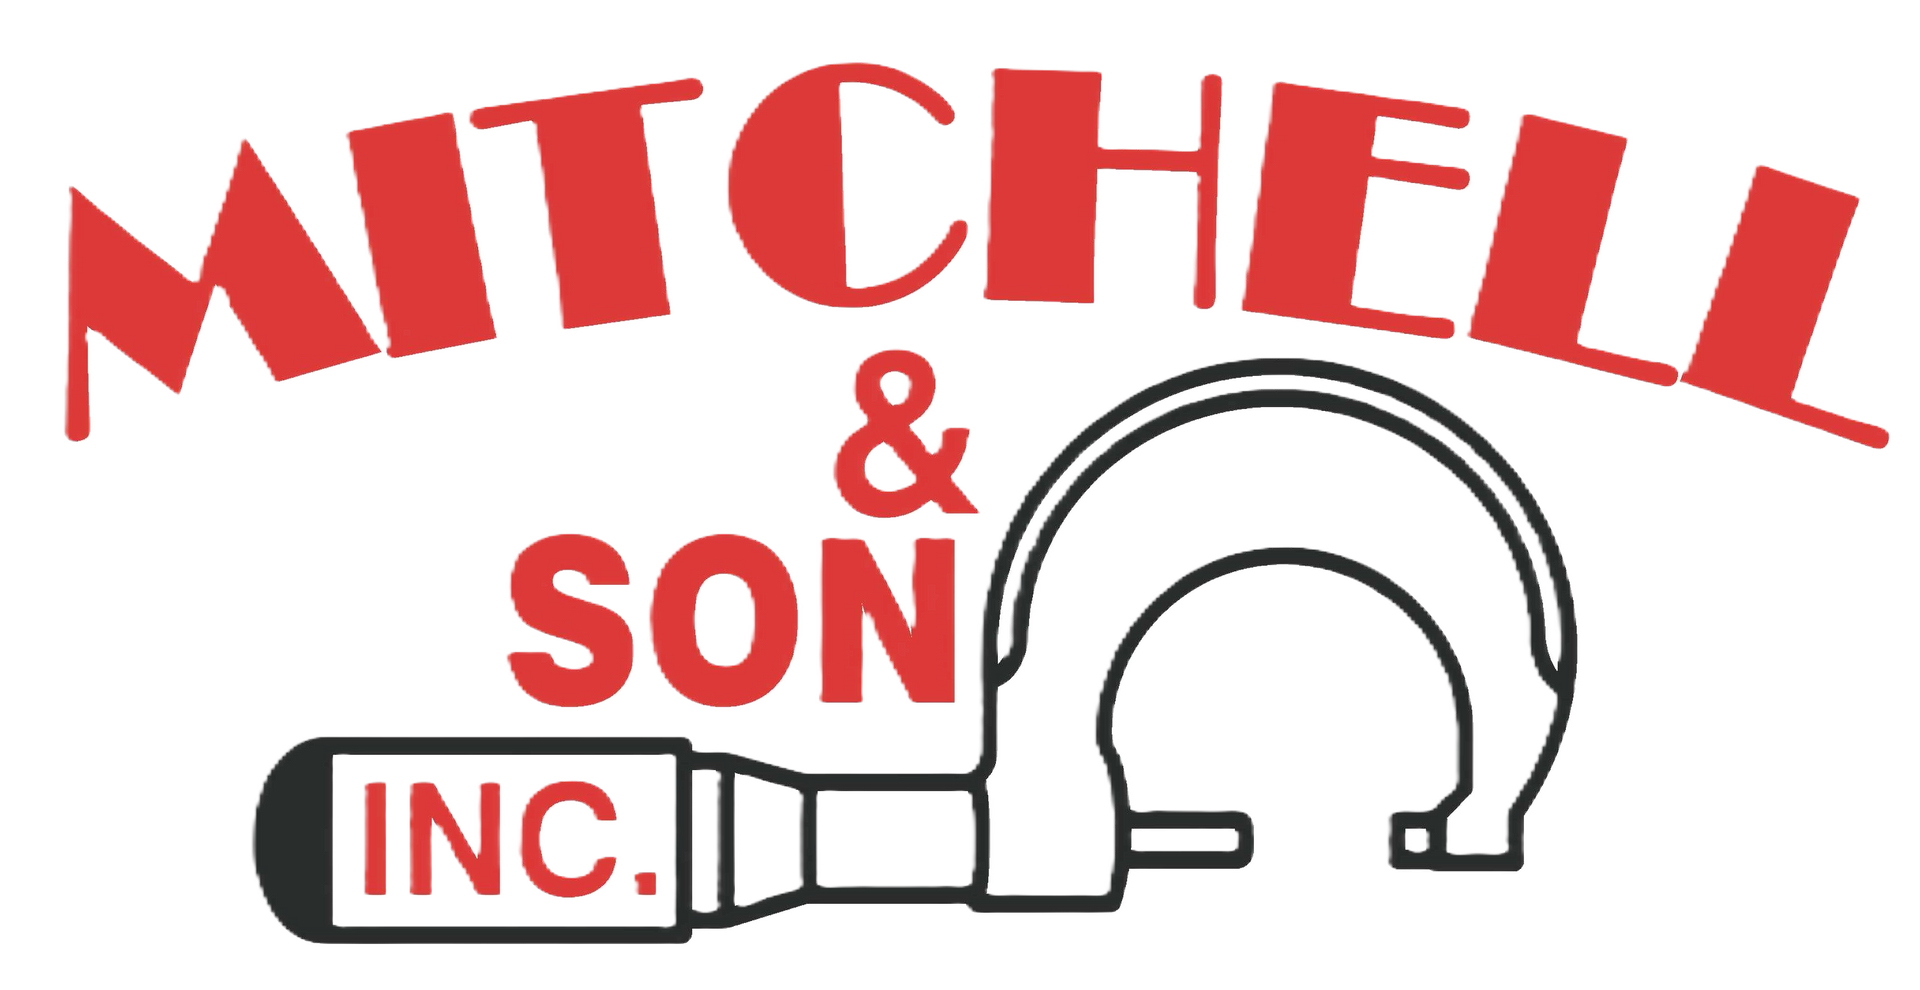 Mitchell And Son Inc